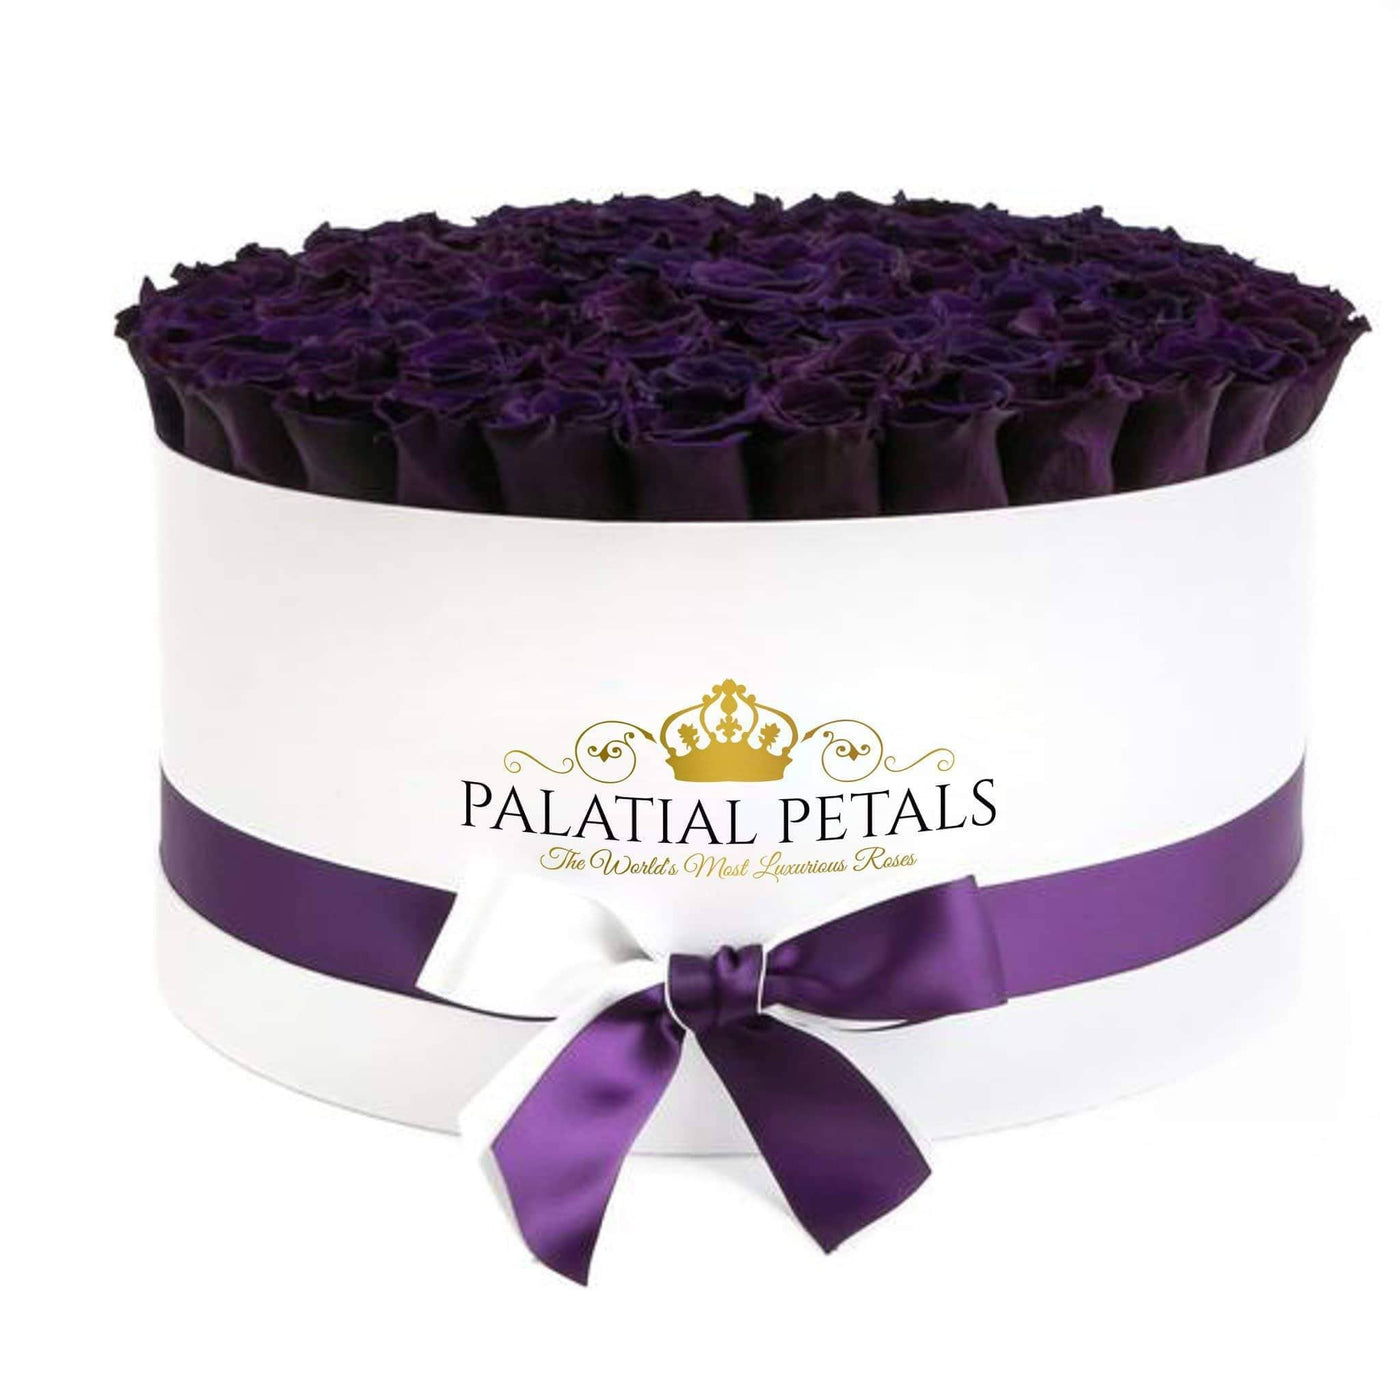 Purple Roses That Last A Year - Deluxe Rose Box